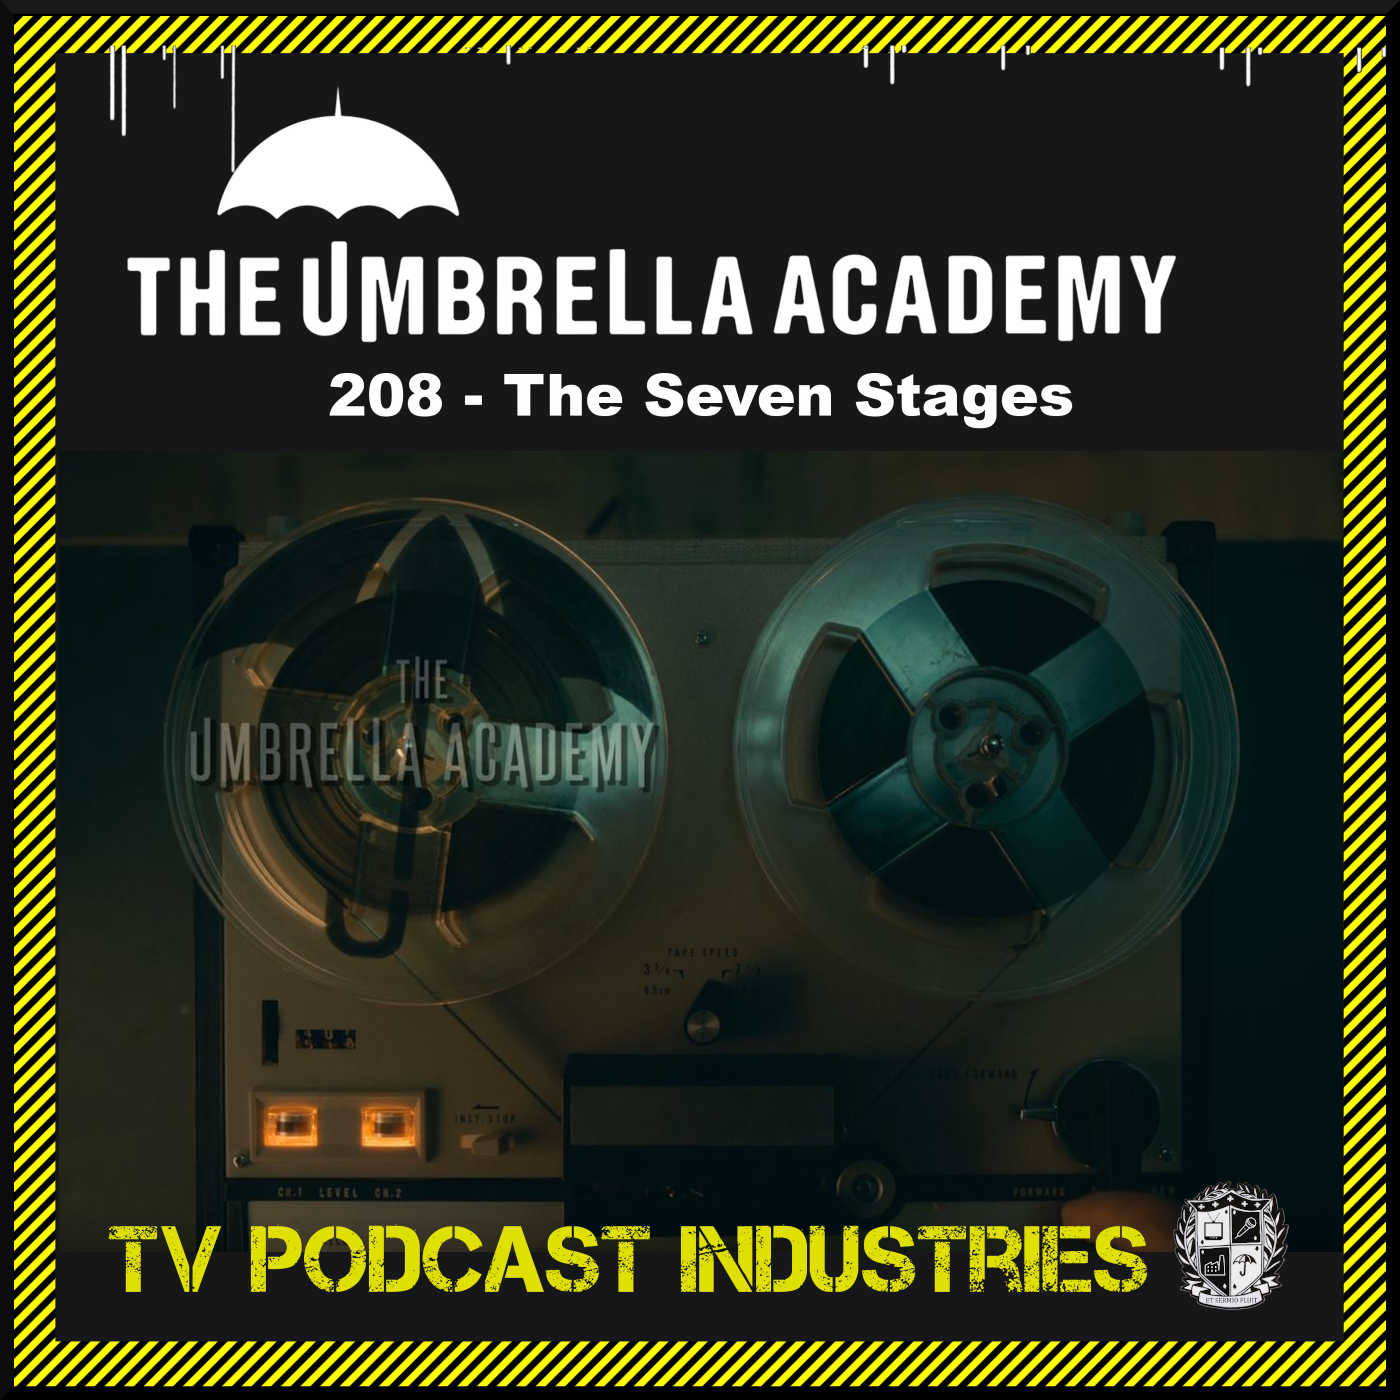 Umbrella Academy 208 Podcast "The Seven Stages"